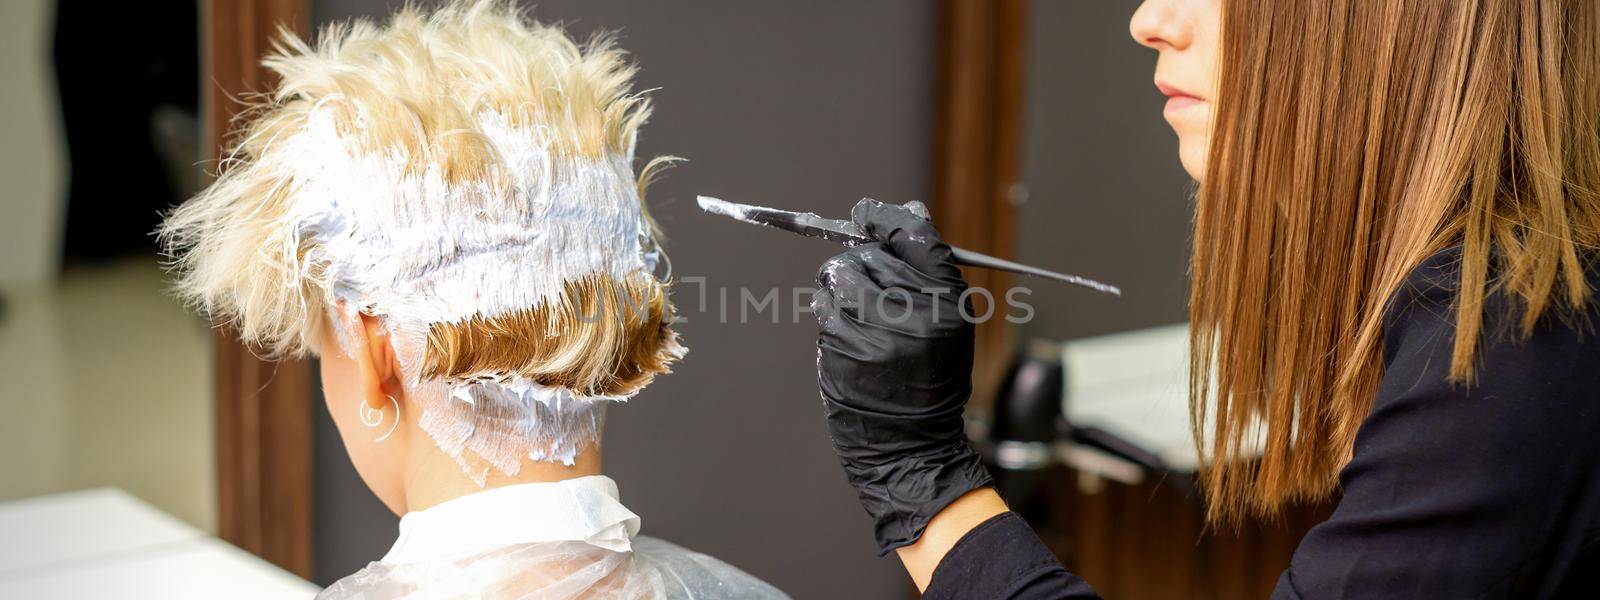 Female hairdresser dyeing short blonde hair of a young woman in a hair salon